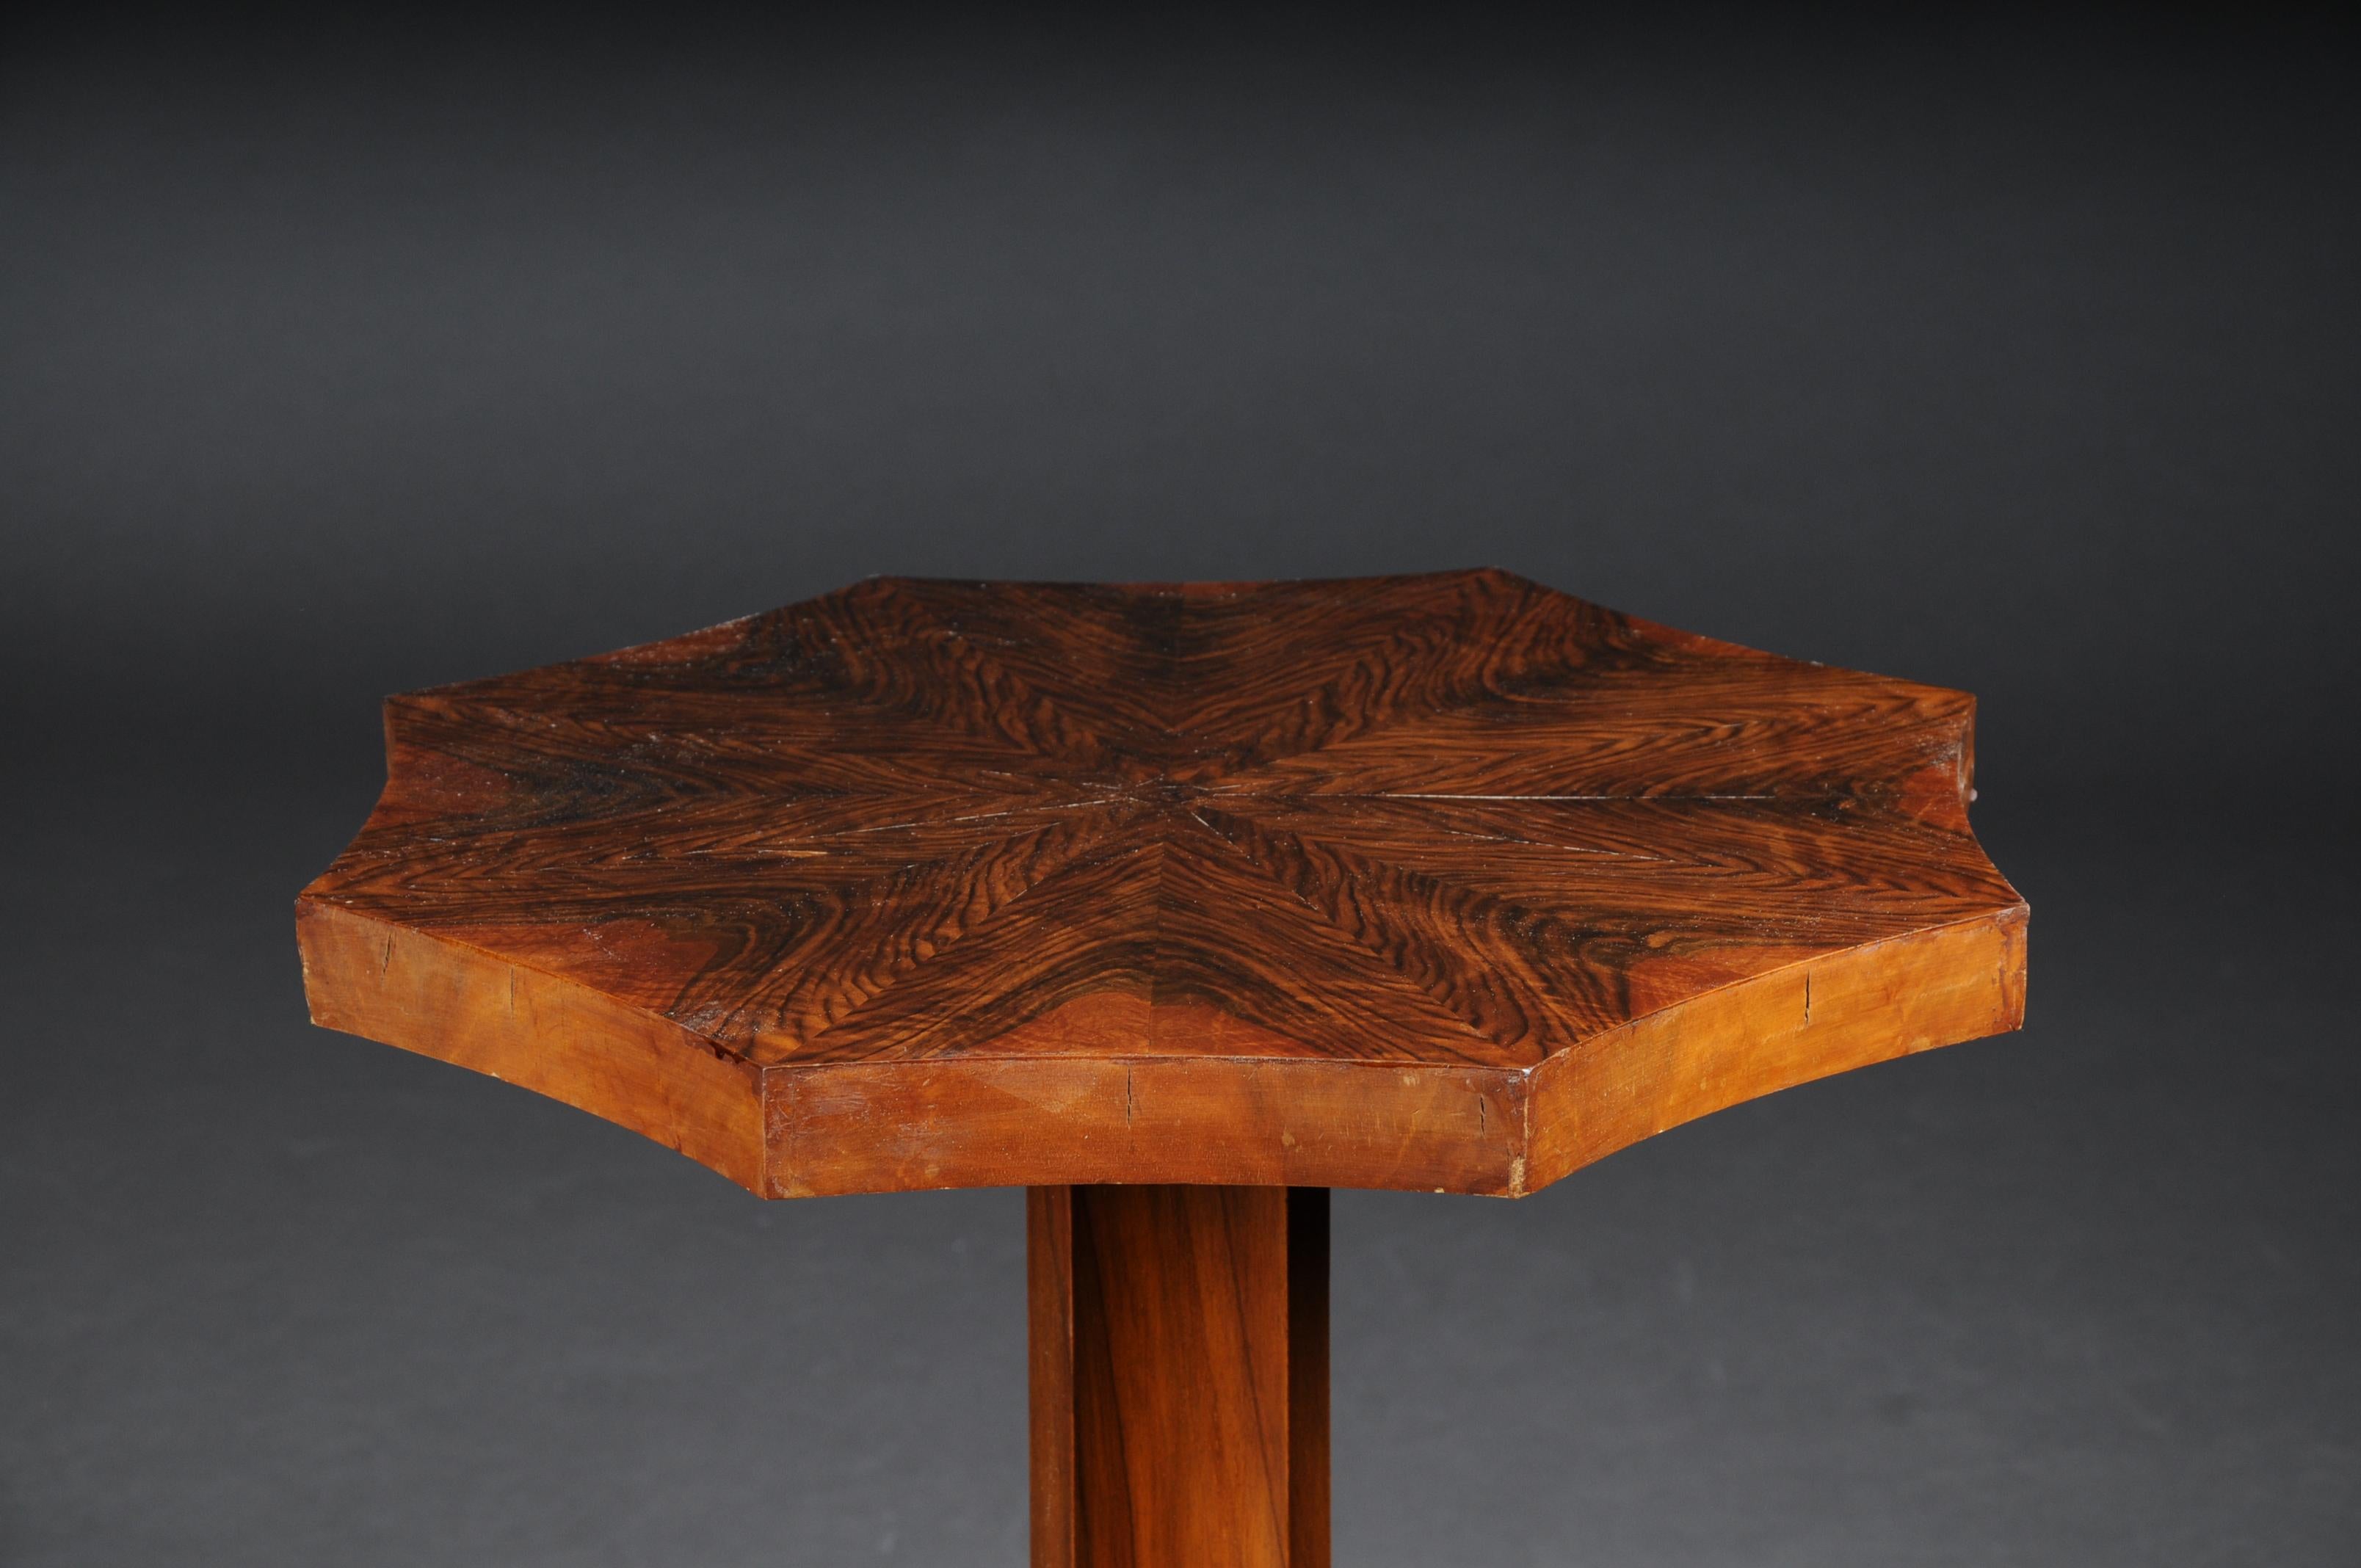 Dainty Art Deco side table root veneer around 1930.

Solid wood with root veneer. Star-shaped cover plate and multi-edged balustrade shaft.
Base also star-shaped. Probably France around 1930.

(A-171).